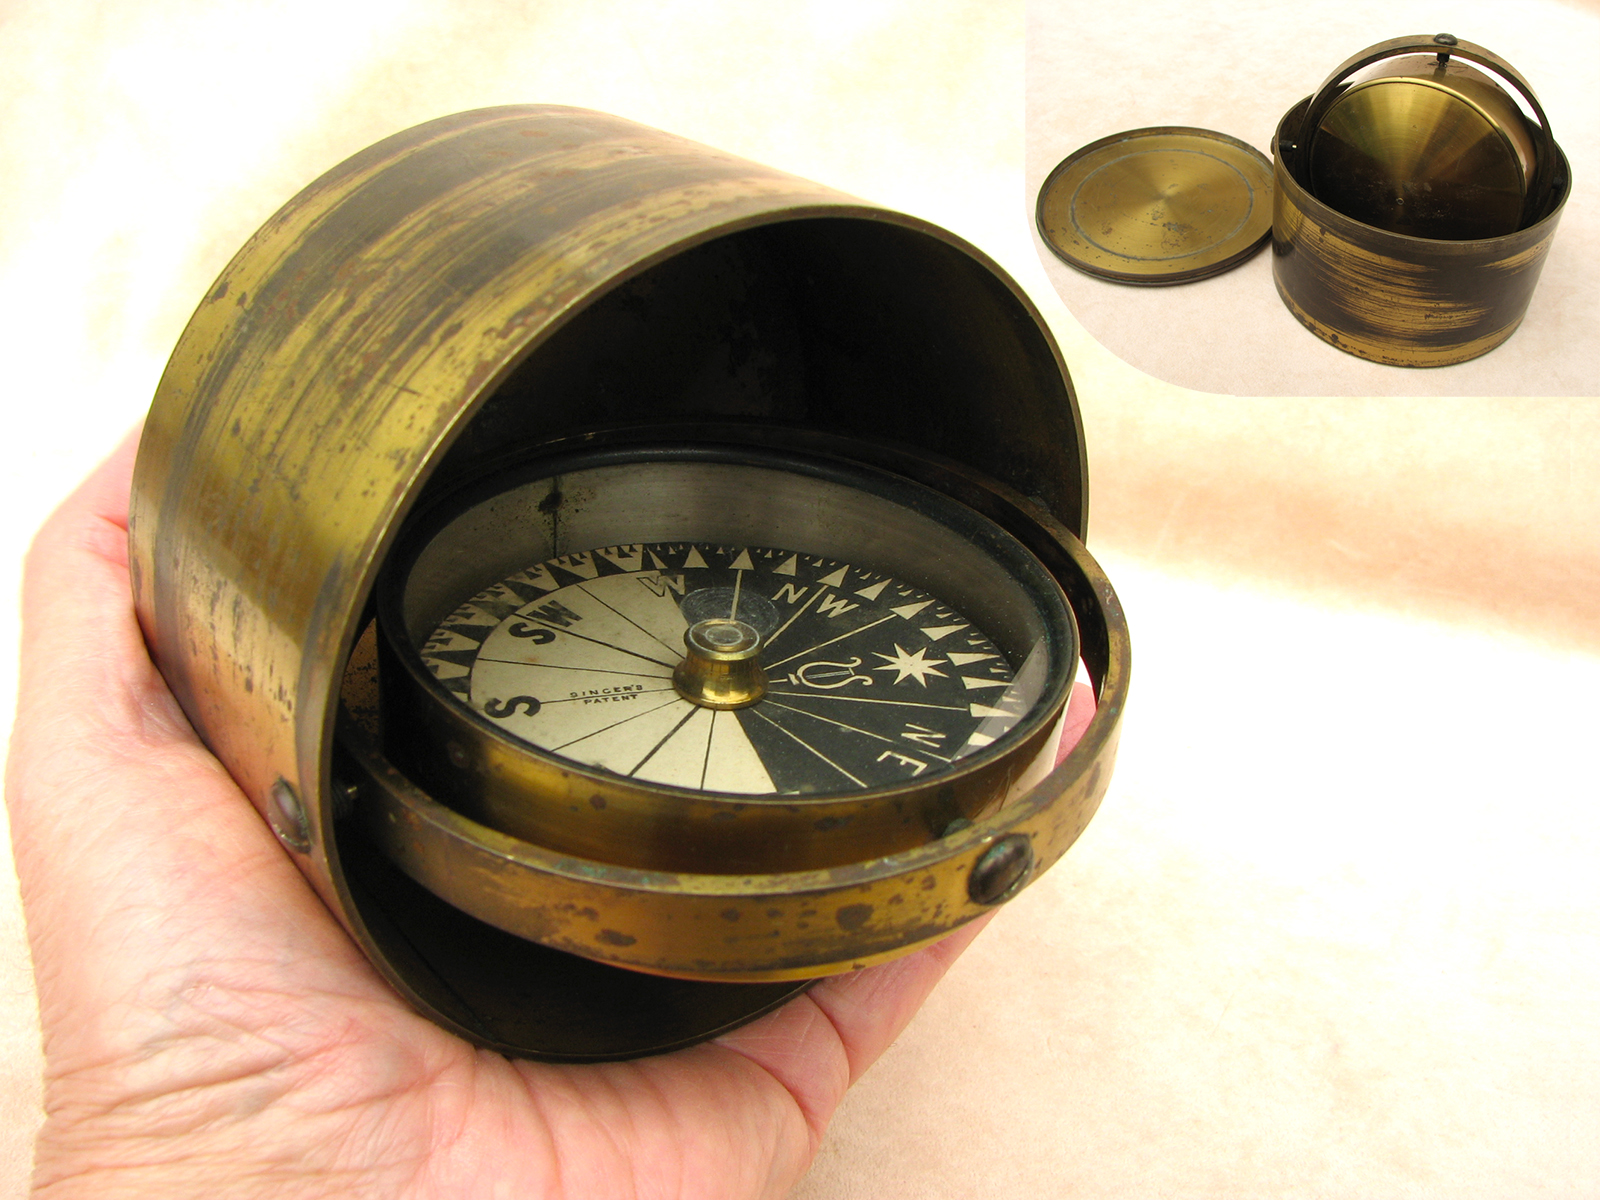 Late 19th century Singer's Patent gimbal mounted Mariners boat compass